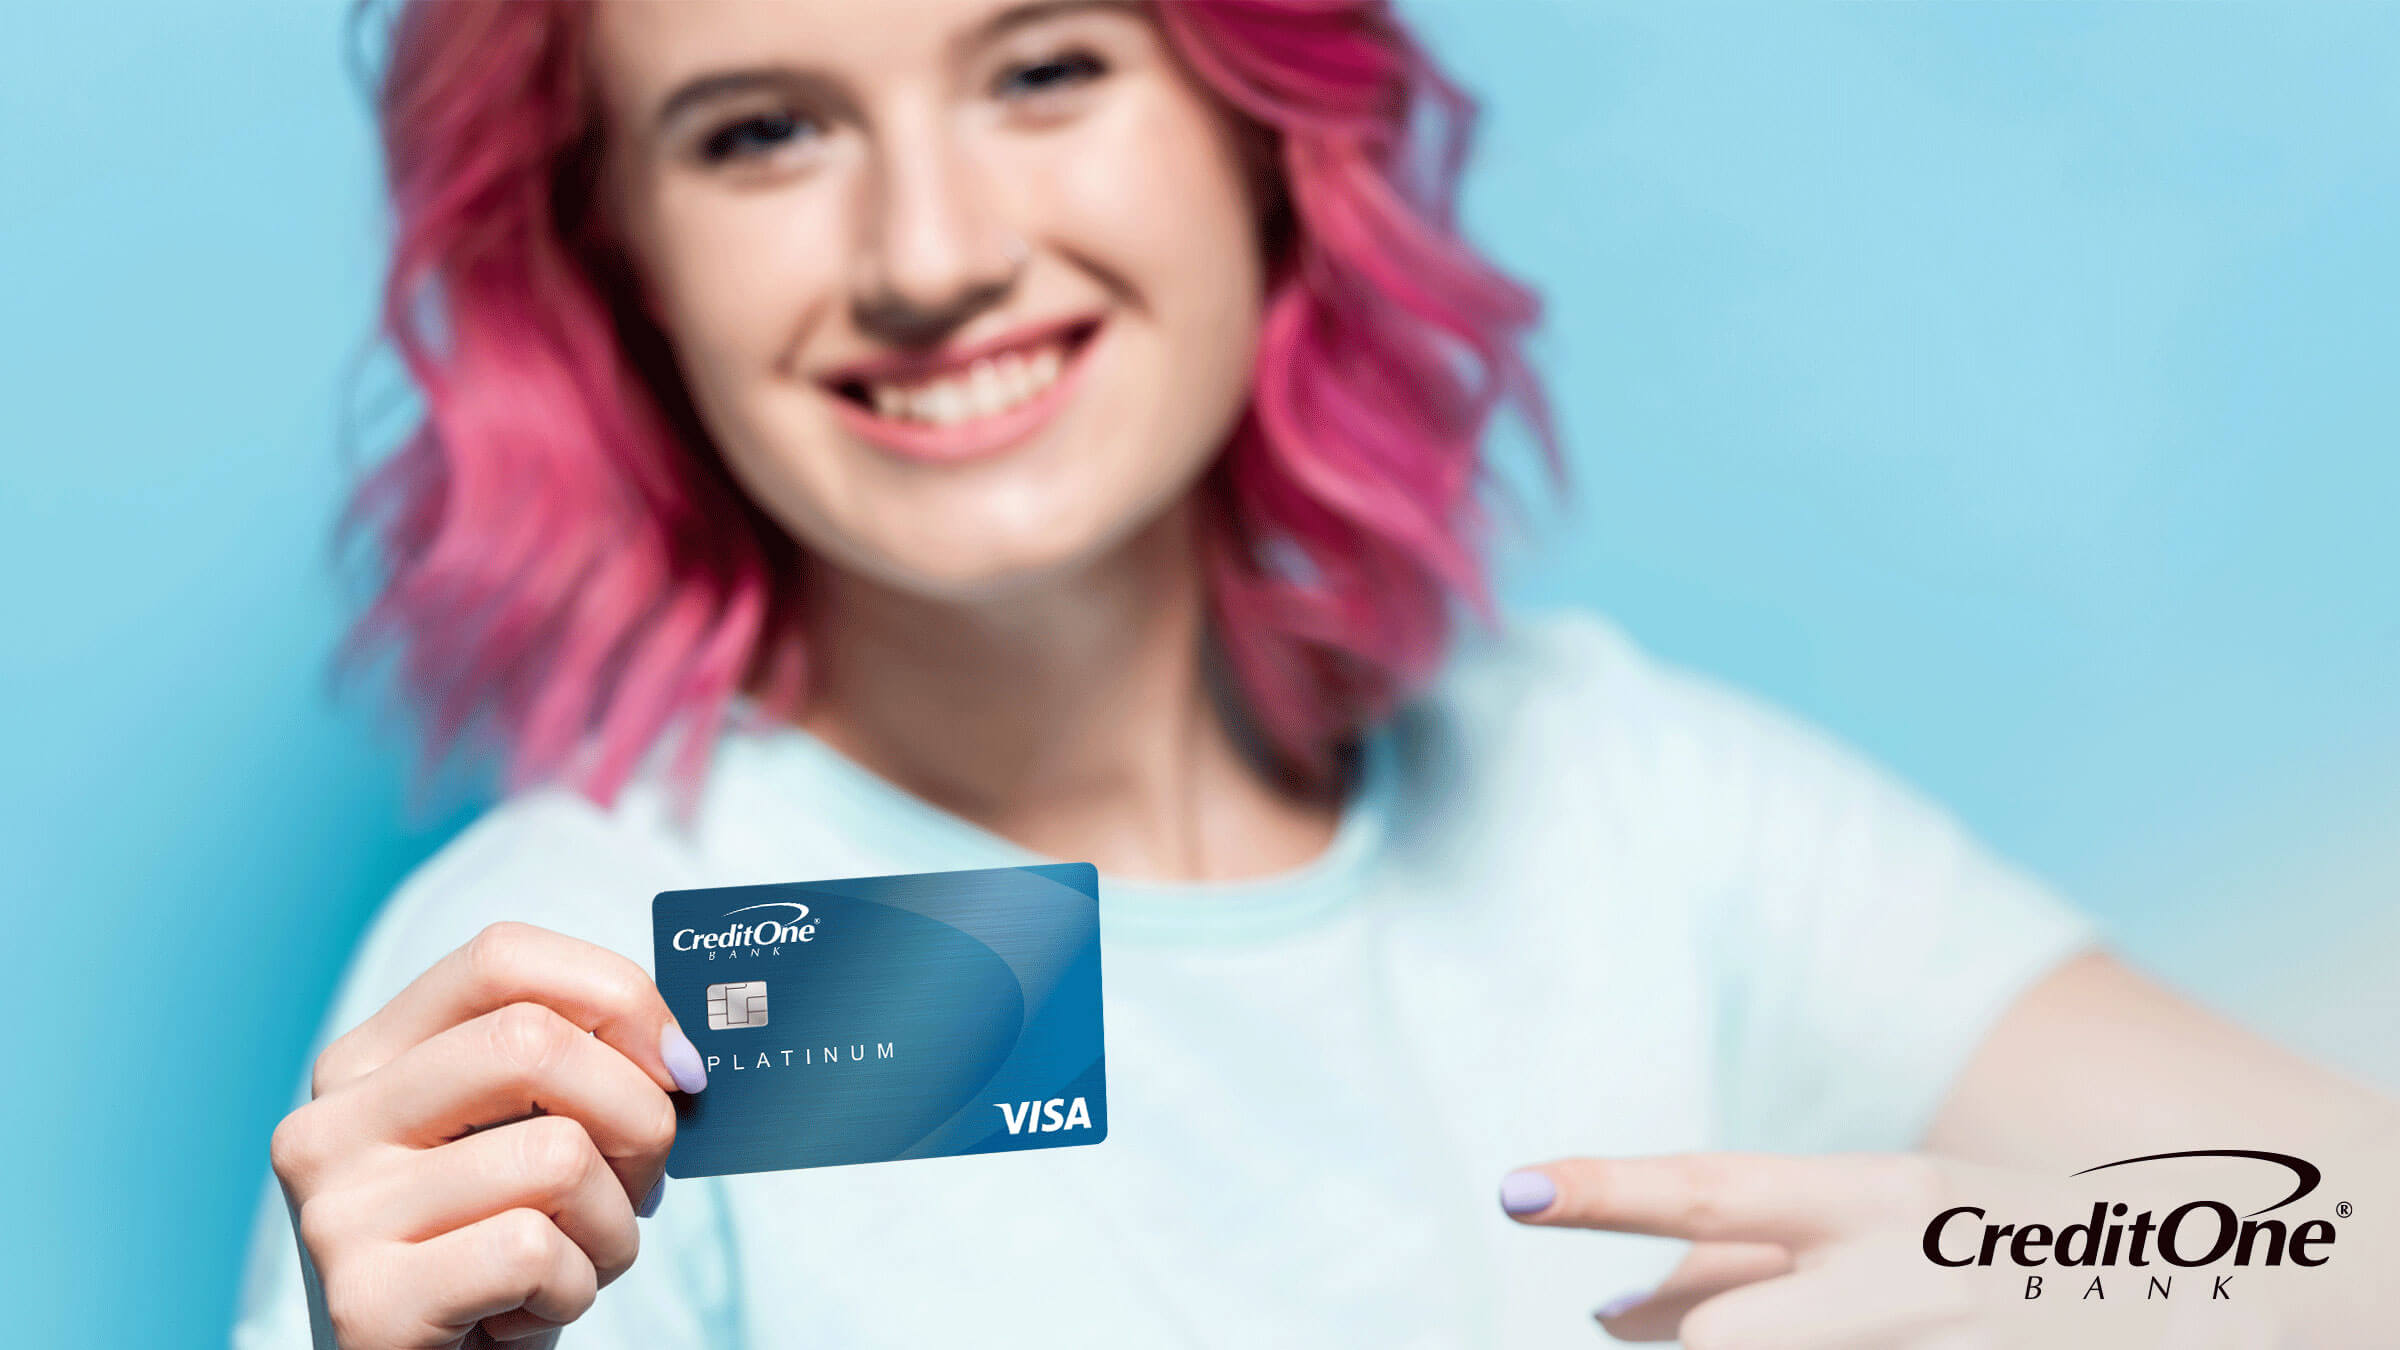 A young person with pink hair smiles as they hold their credit card up with one hand while pointing to it with the other.